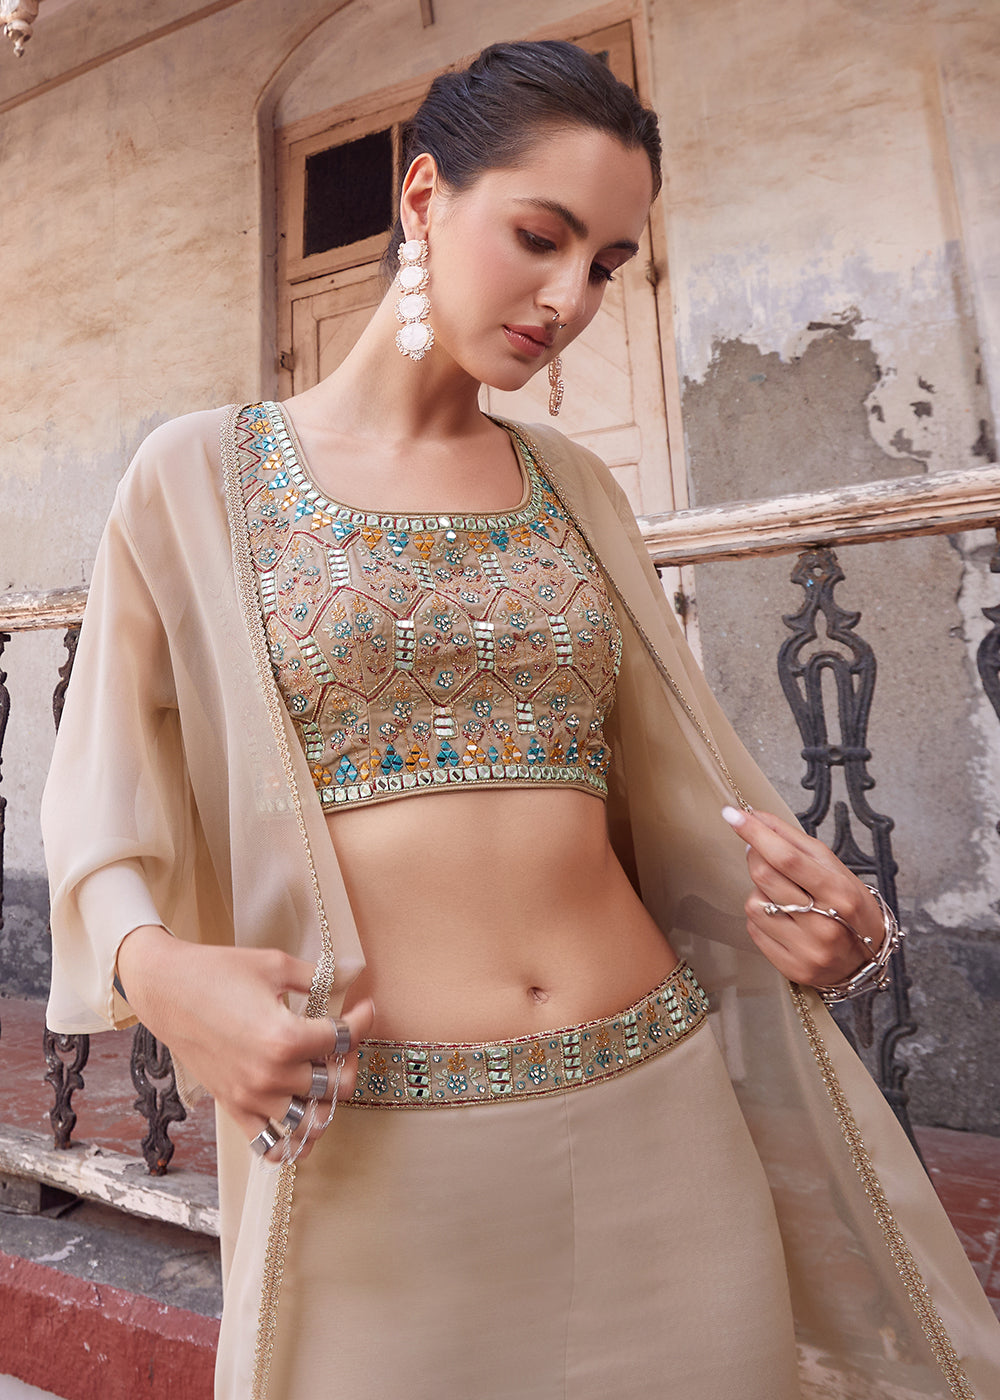 Shop Now Stunning Beige Designer Crop Top Style Sharara Suit Online at Empress Clothing in USA, UK, Canada, Italy & Worldwide.